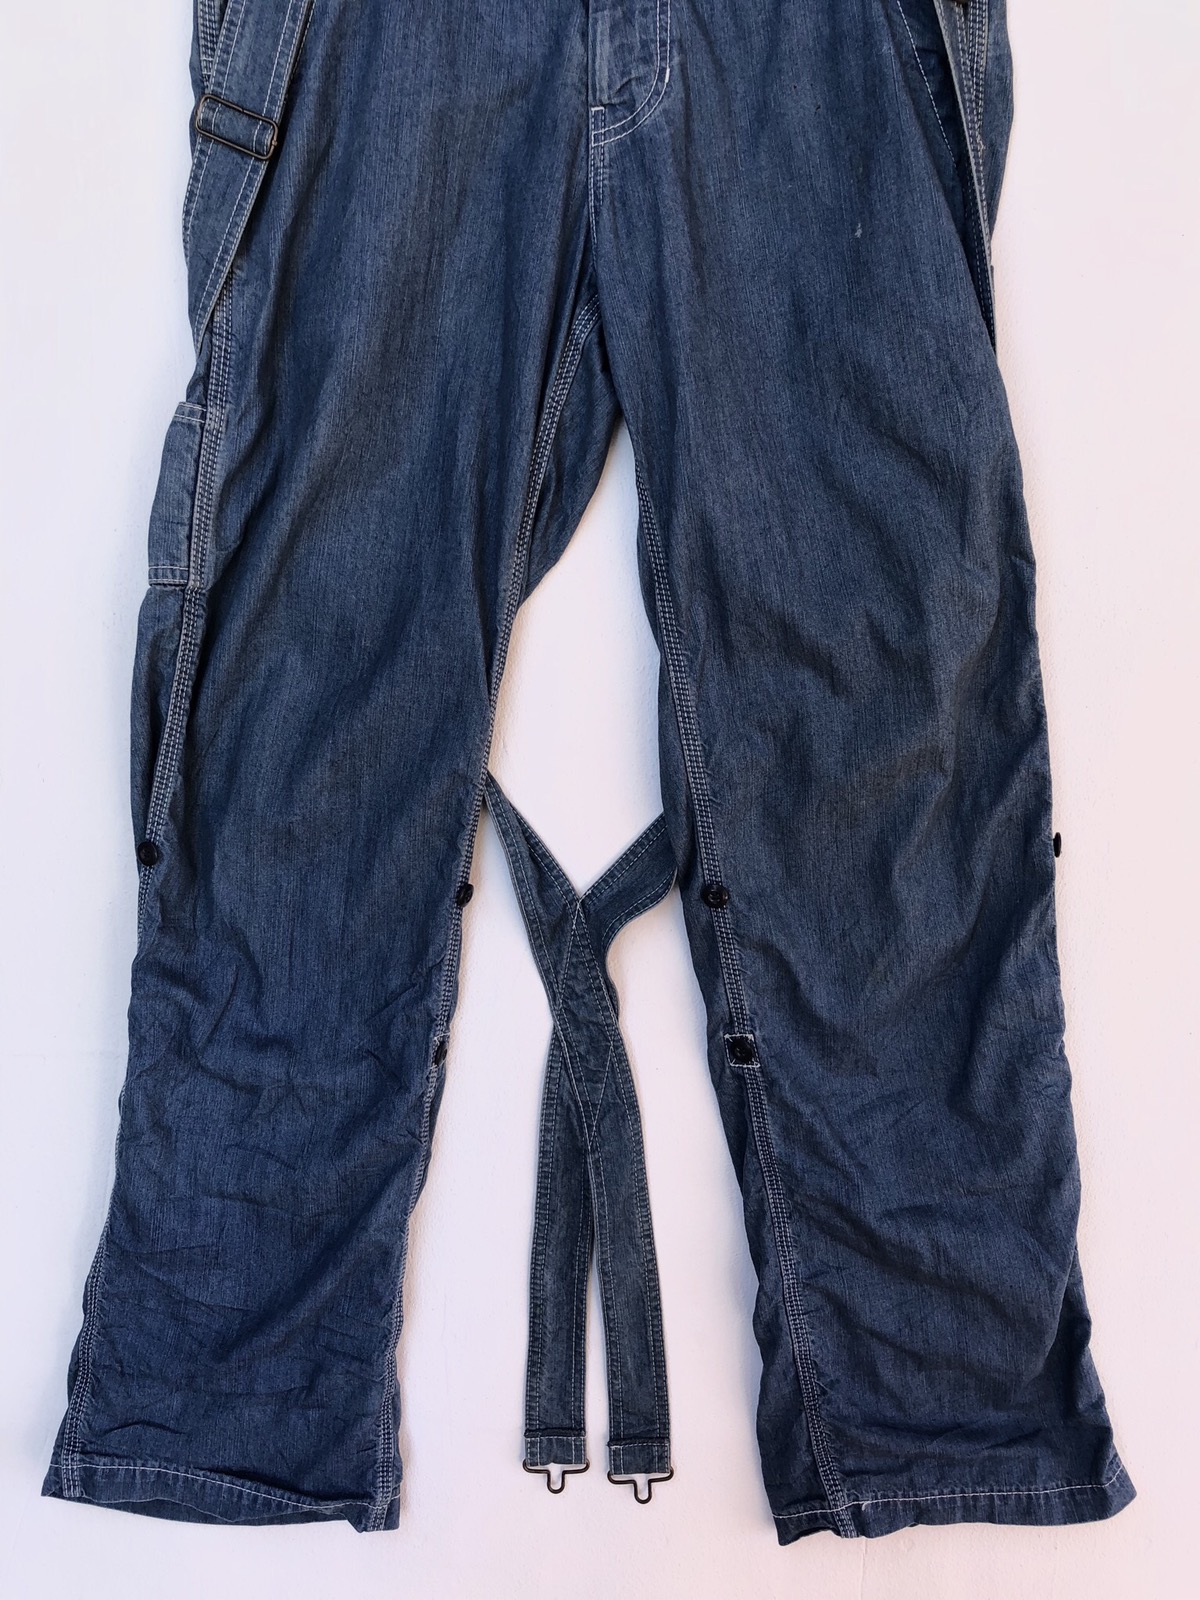 Workers - JAPANESE BRAND RAGEBLUE OVERALL WORKWEAR STYLE - 3